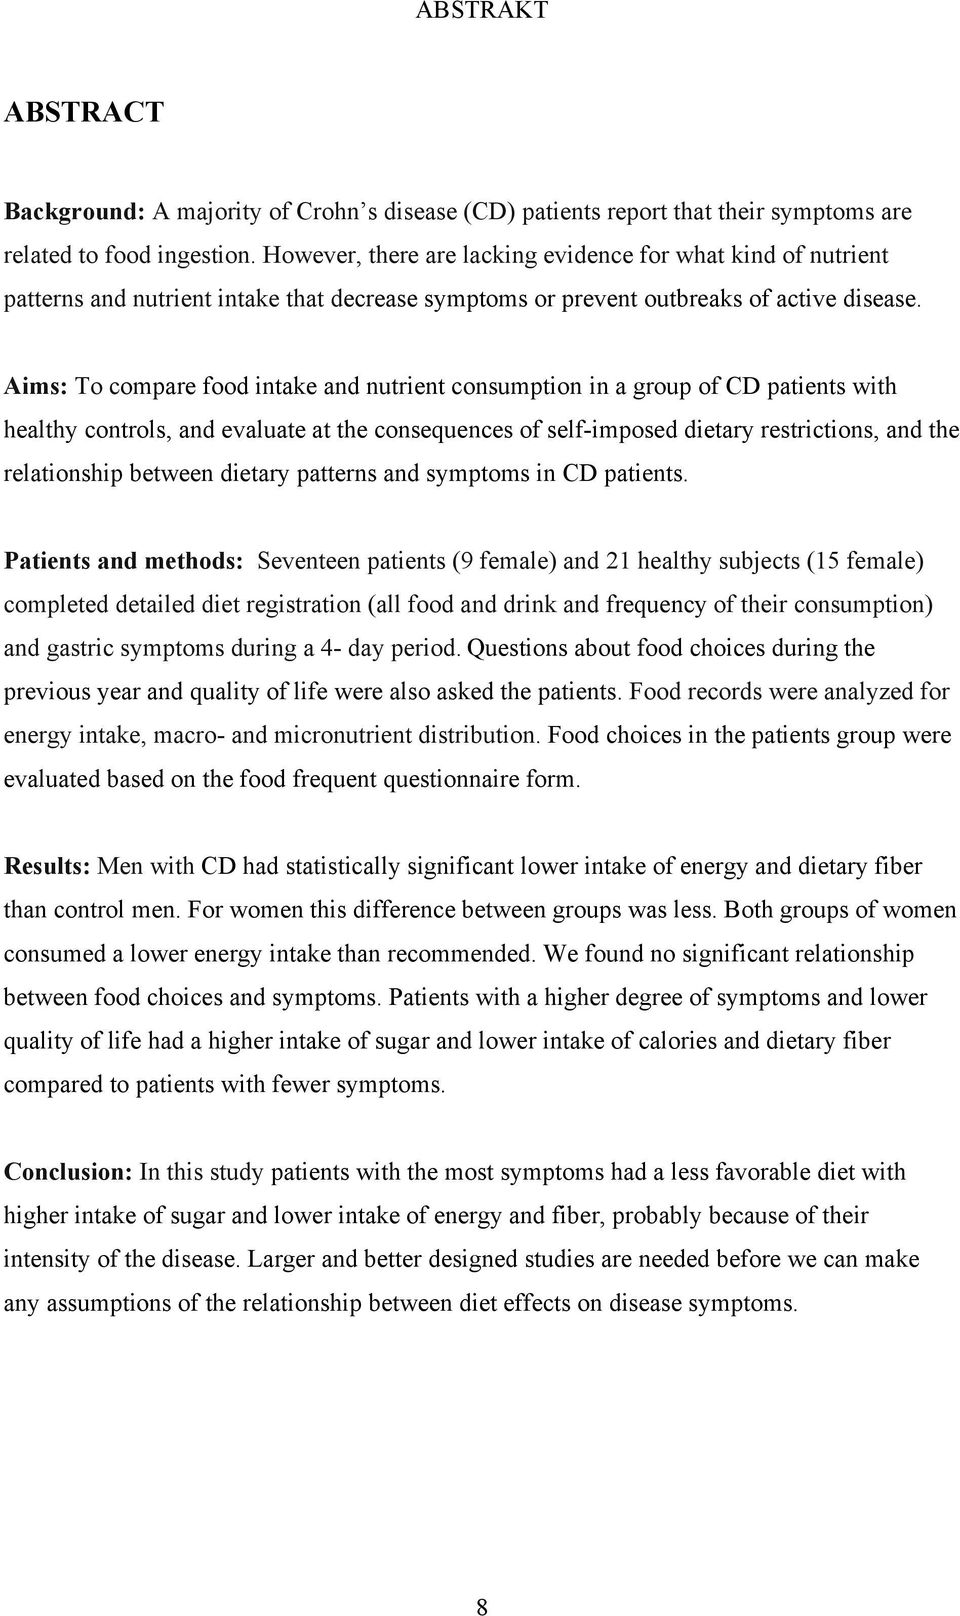 Aims: To compare food intake and nutrient consumption in a group of CD patients with healthy controls, and evaluate at the consequences of self-imposed dietary restrictions, and the relationship